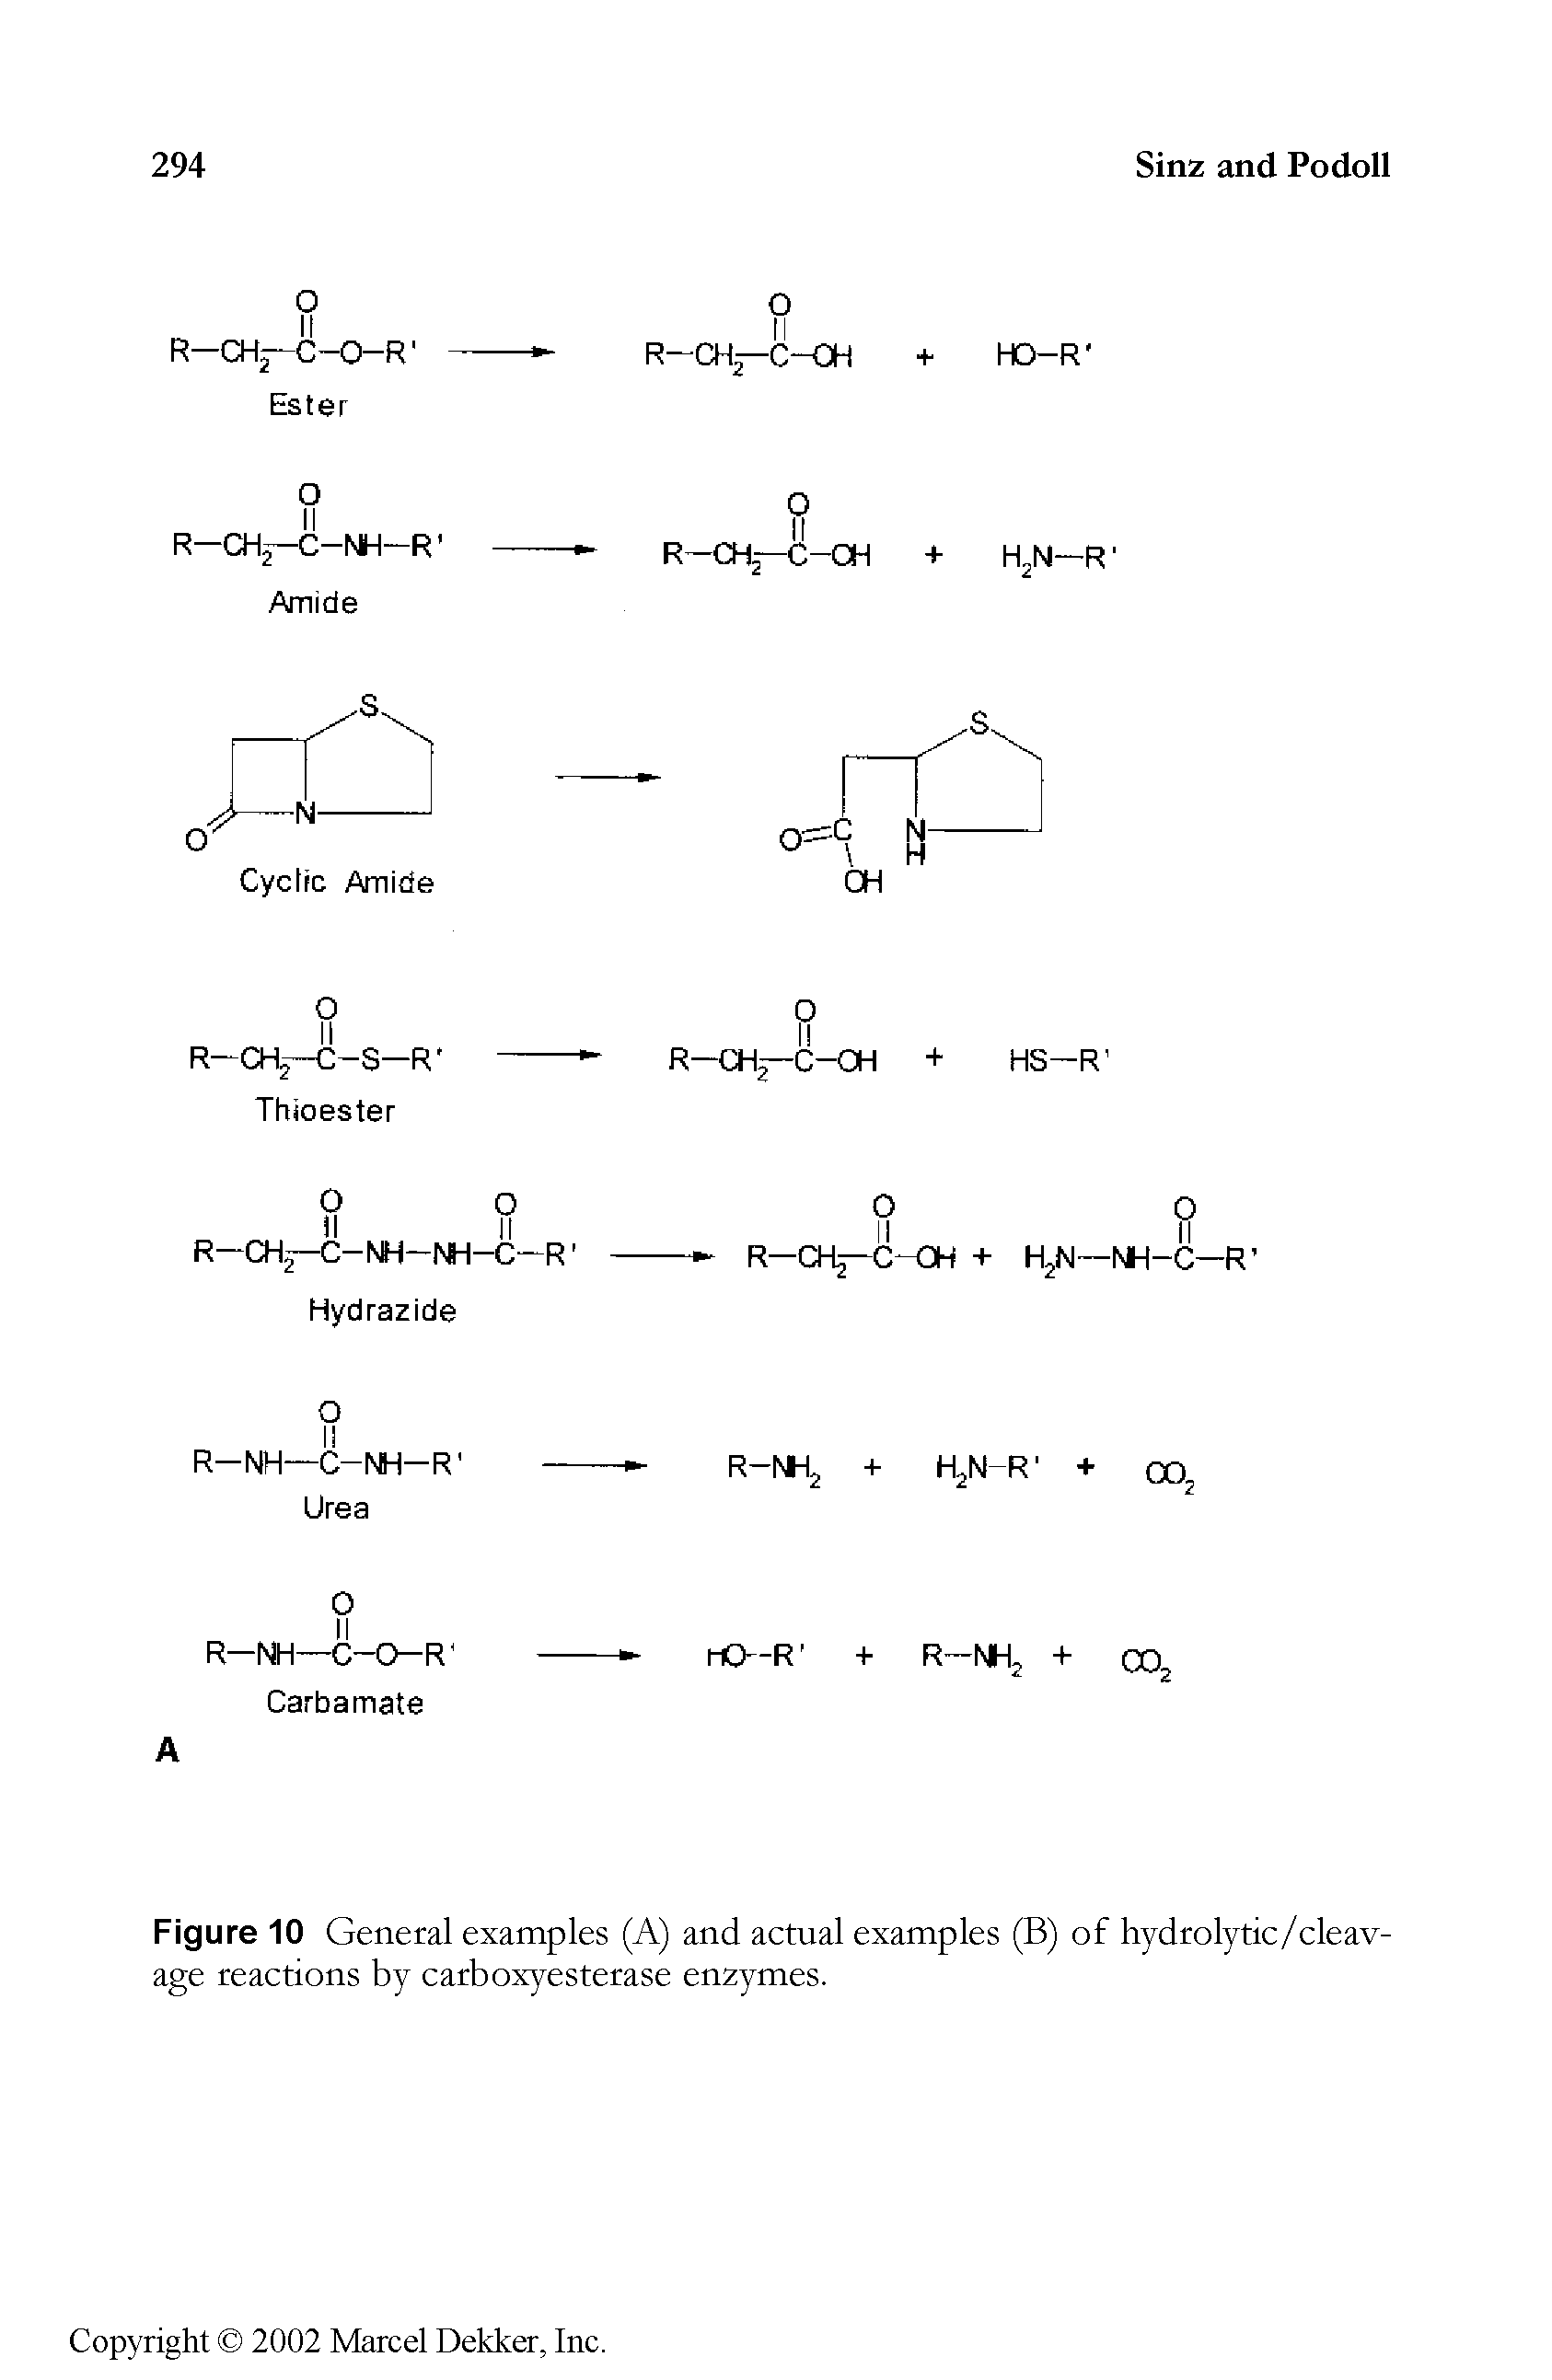 Figure 10 General examples (A) and actual examples (B) of hydrolytic/cleav-age reactions by carboxyesterase enzymes.